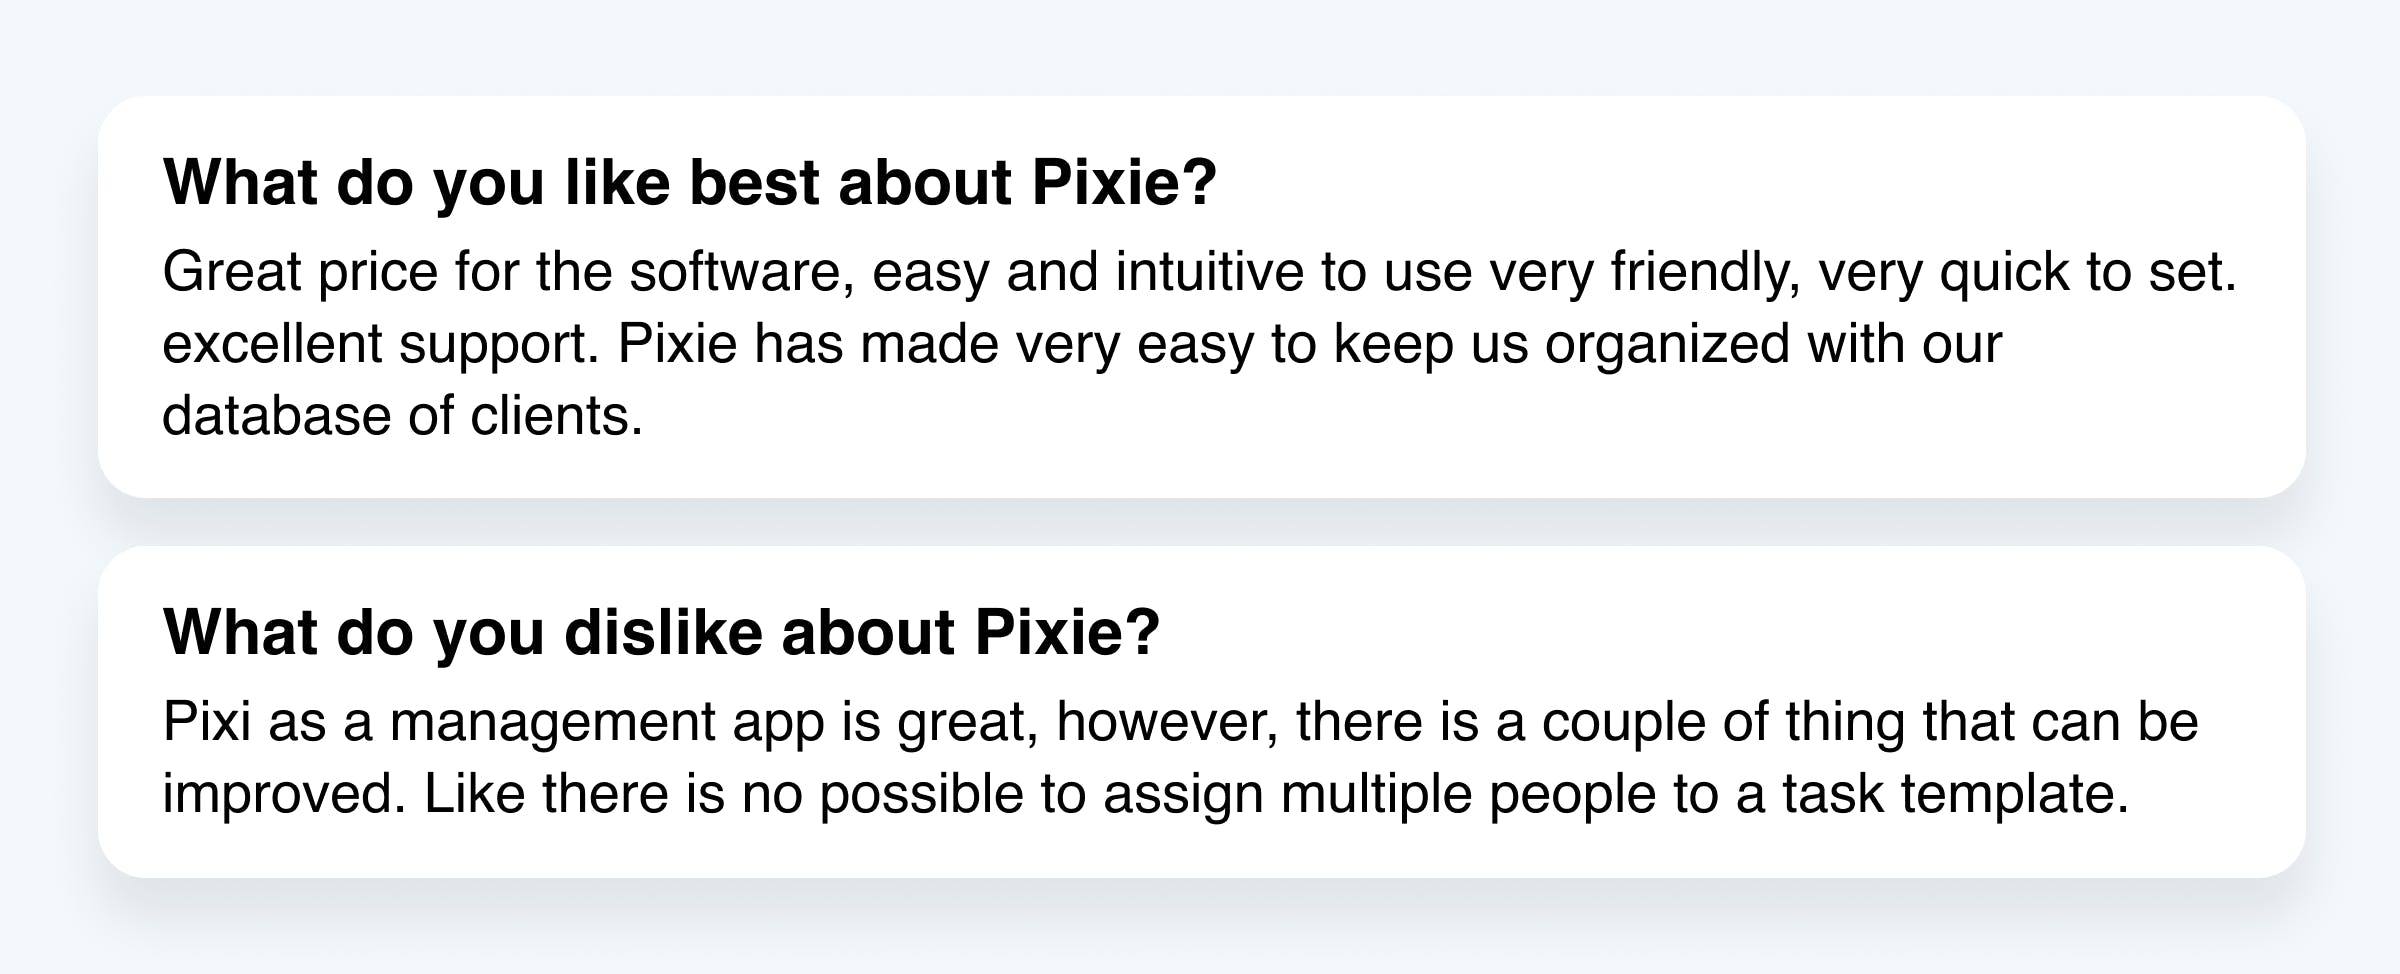 Screenshot of a user review listing things they like and dislike about Pixie.